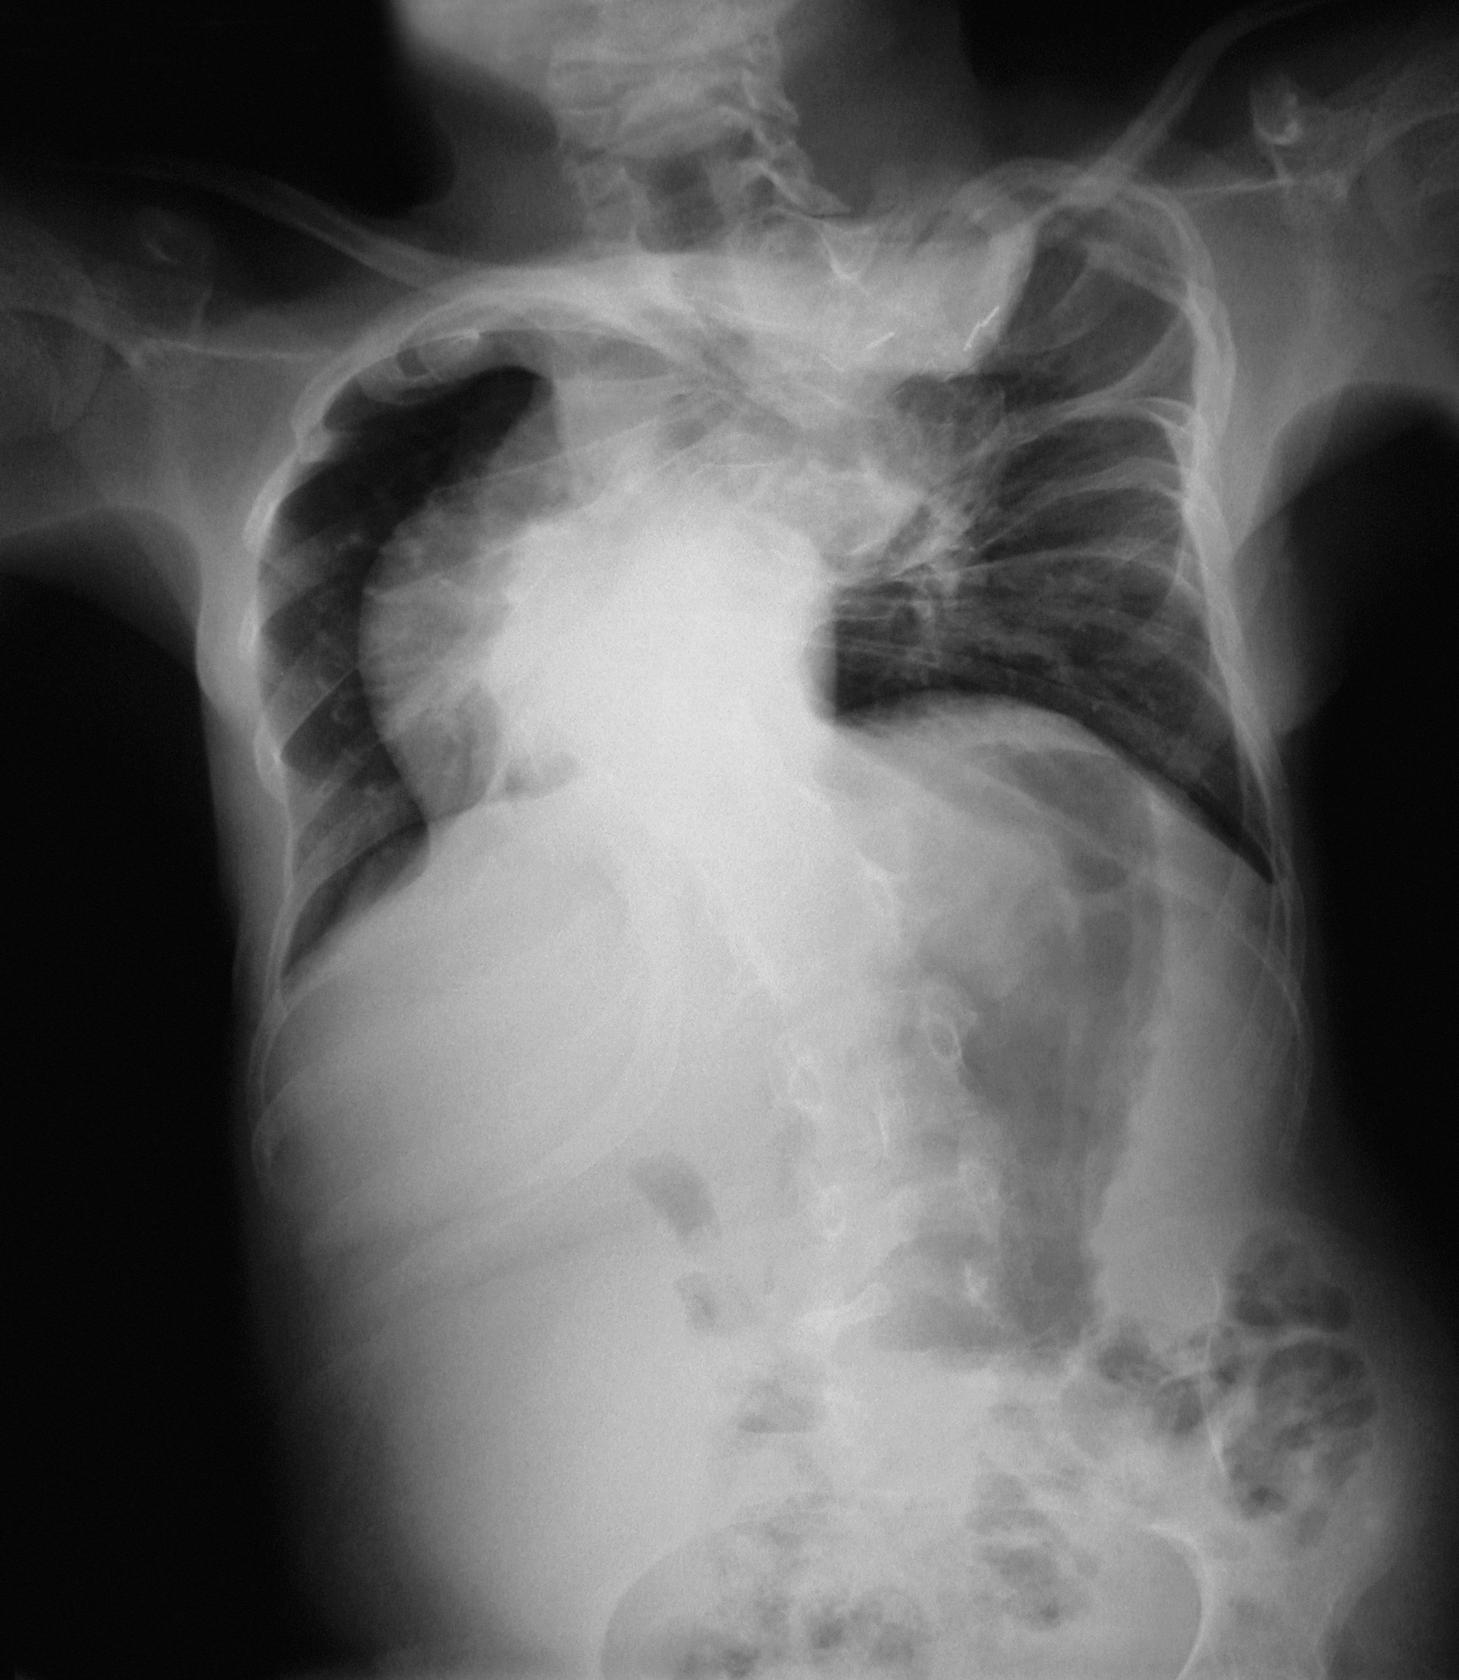 pigeon chest x ray